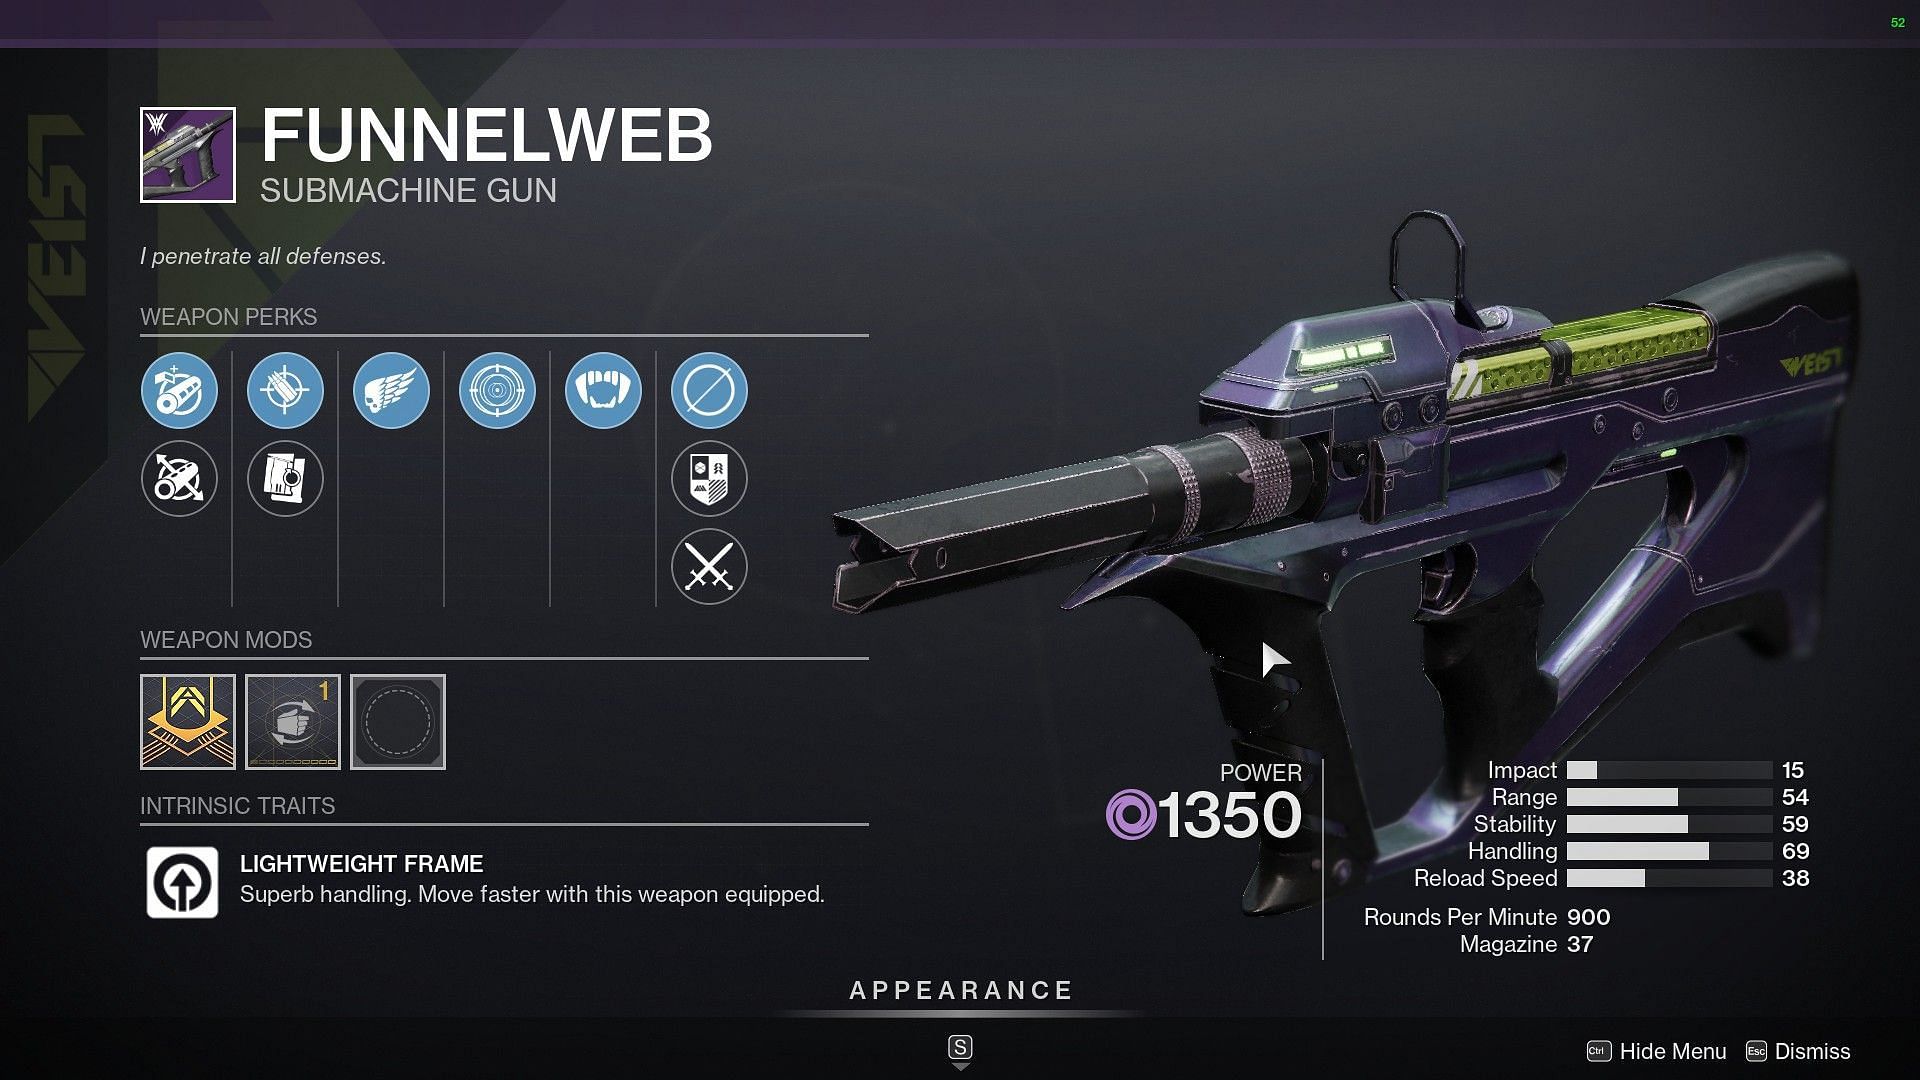 Funnelweb perks that Banshee-44 is selling in Destiny 2 right now (Image via Bungie)